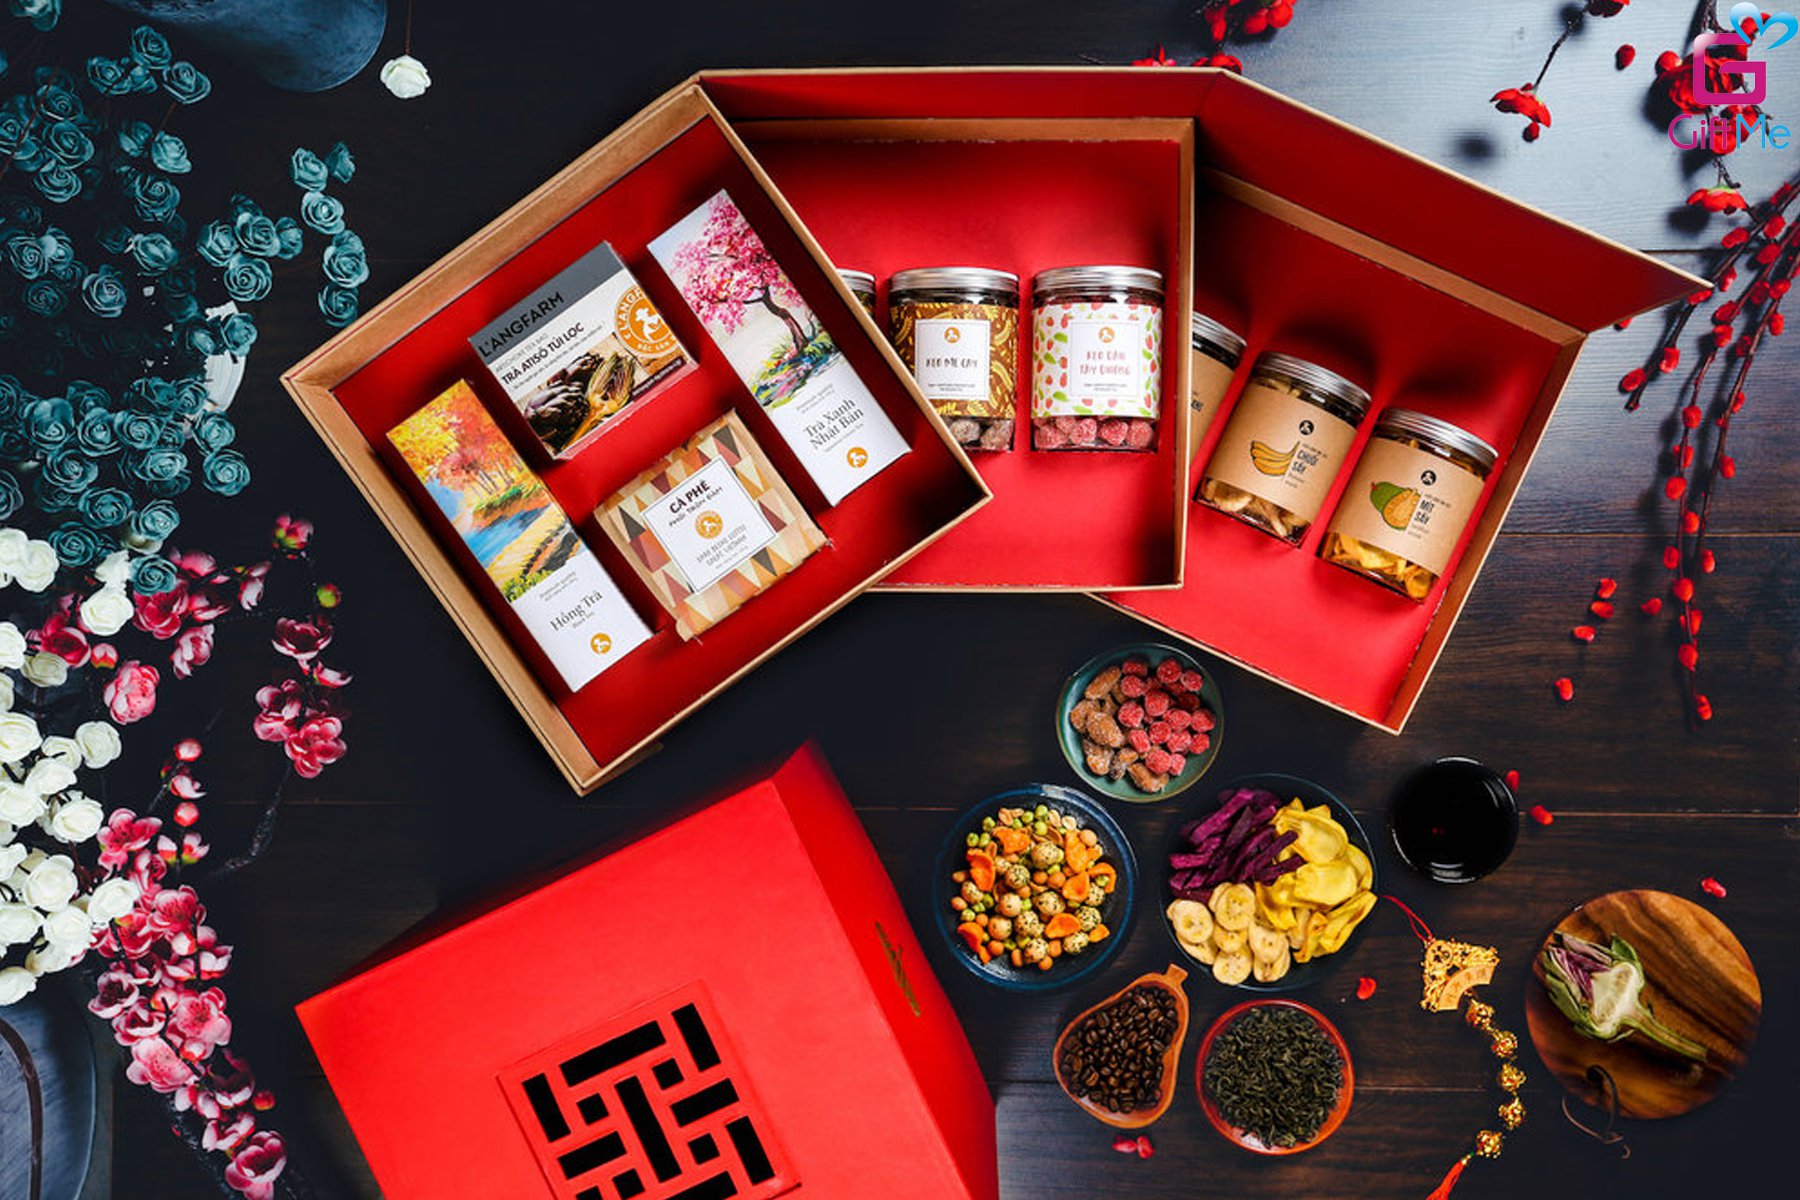 Luxurious Tet gifts box is made by hand meaningfully